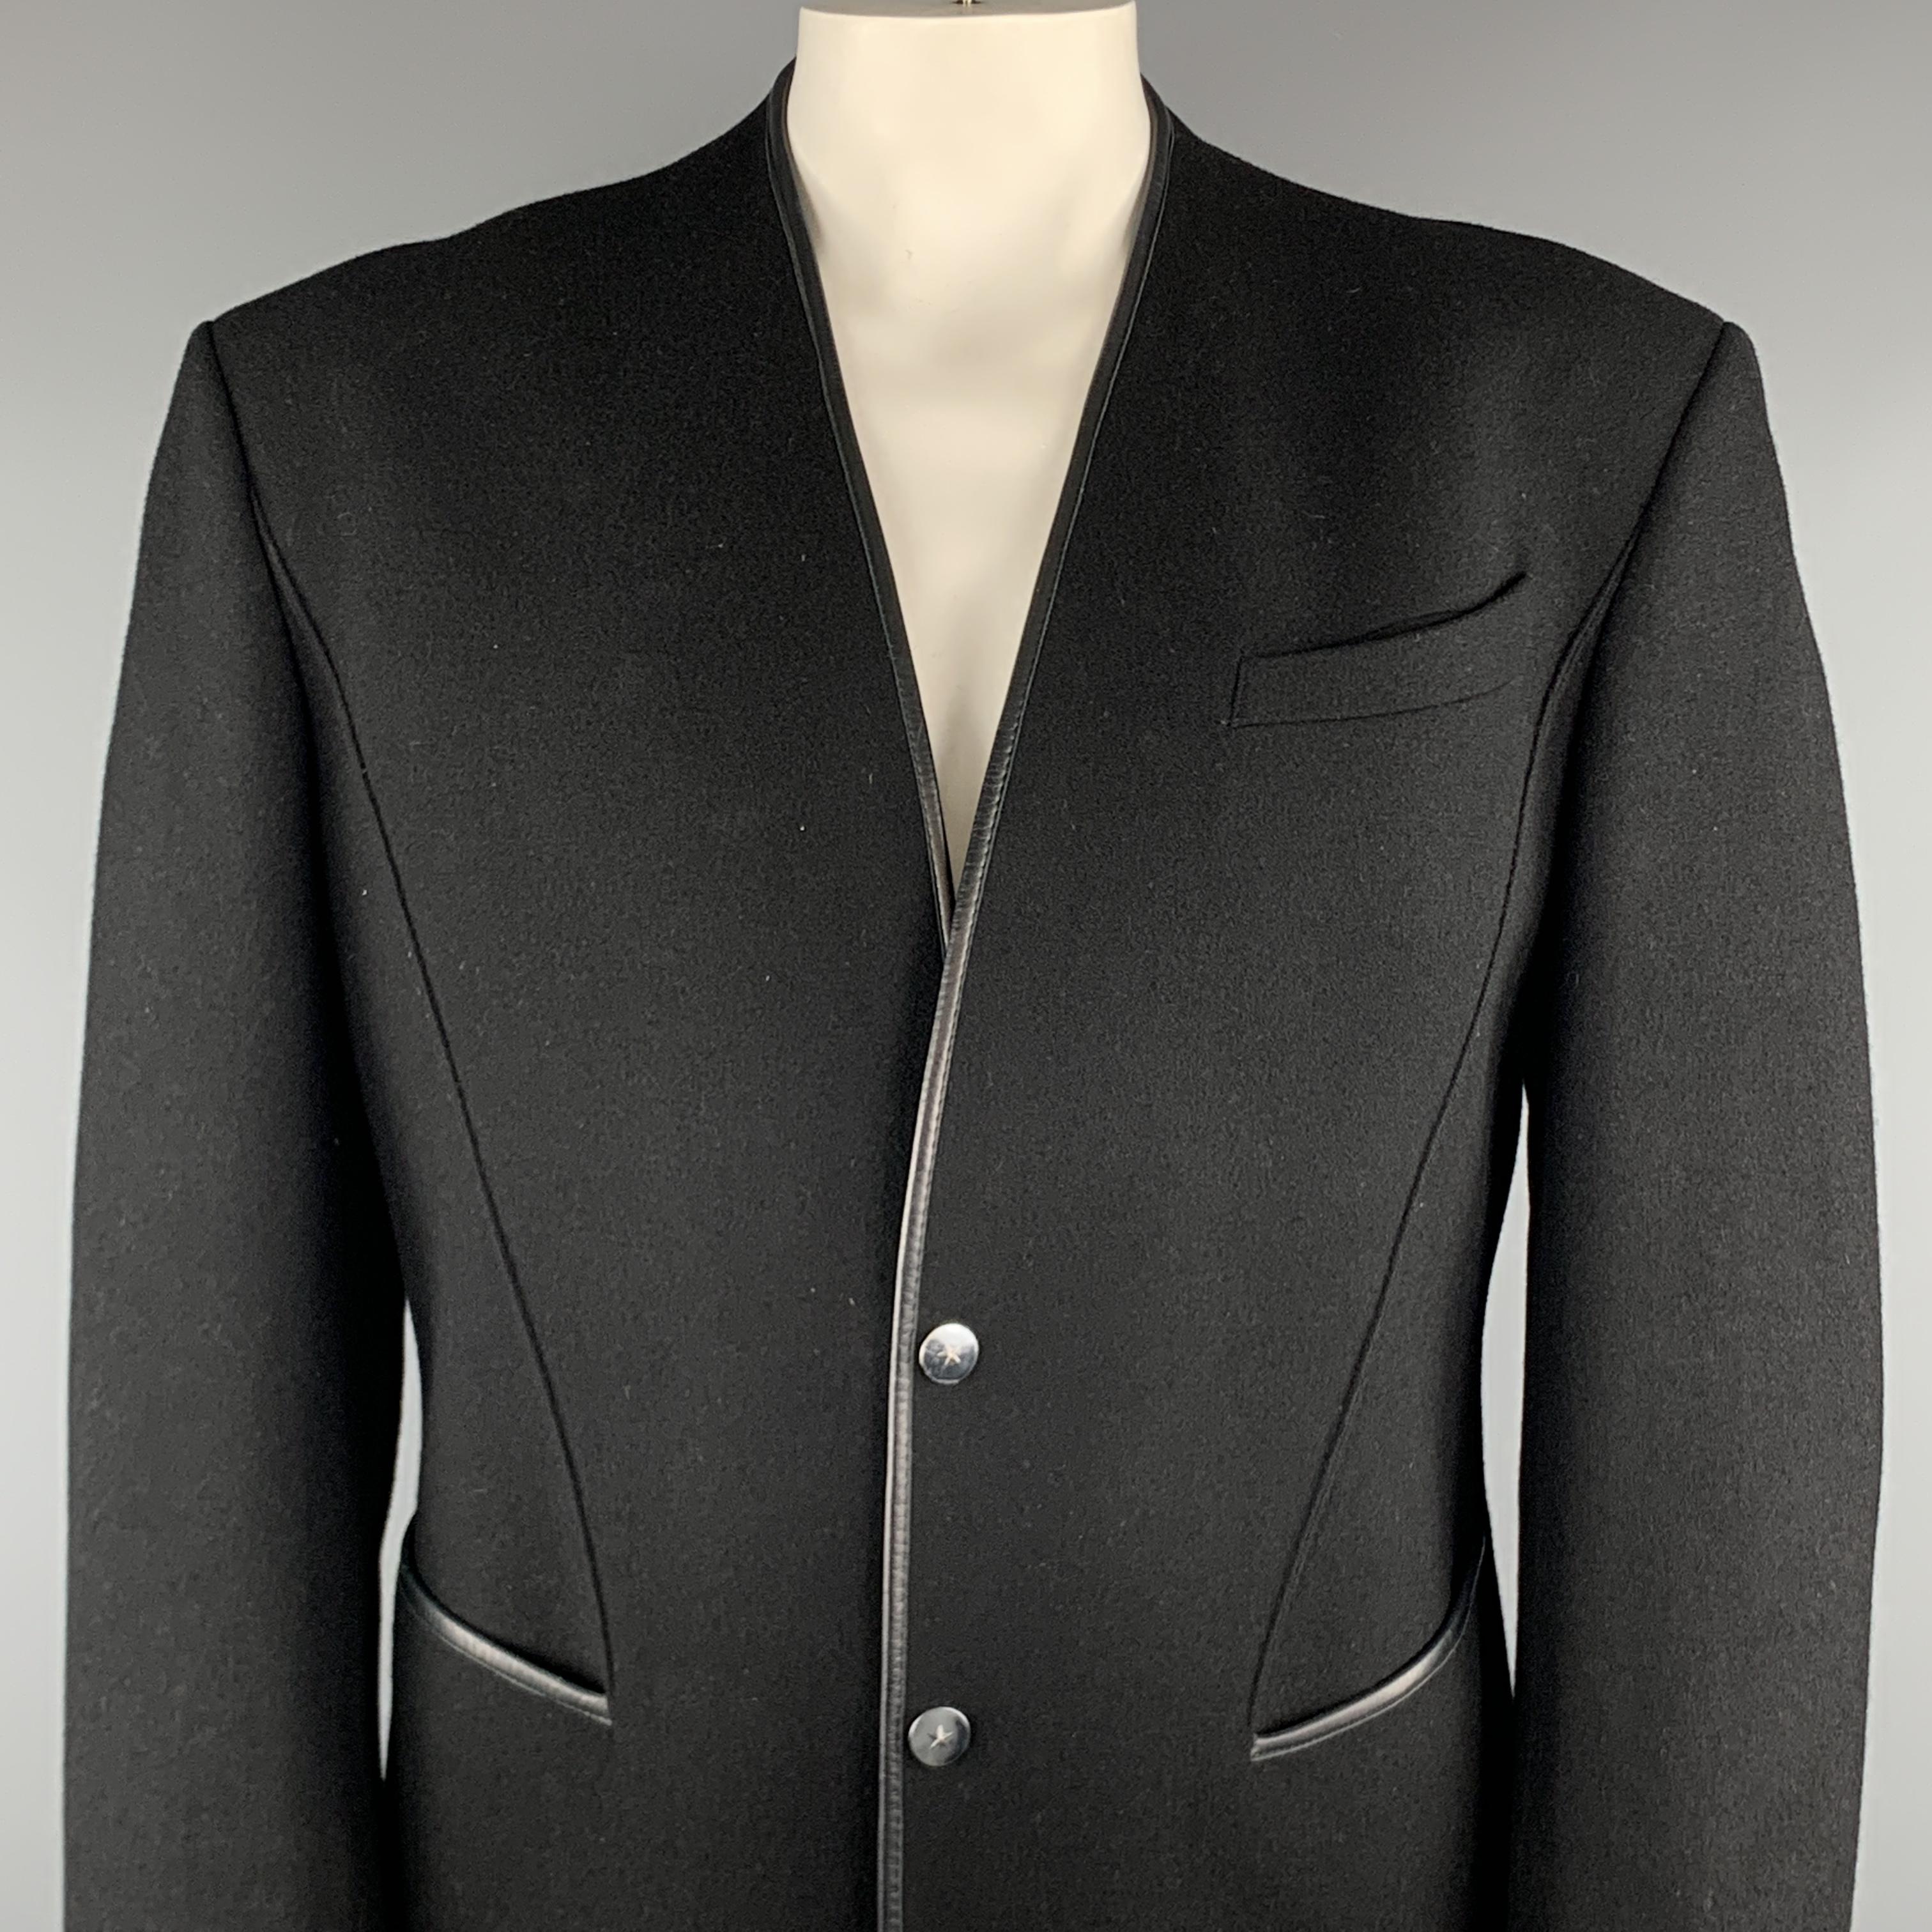 VINTAGE THIERRY MUGLER Jacket comes in a black wool blend featuring a leather trim detail, slit pockets, and a two snap button closure. Made in France. 

Excellent Pre-Owned Condition.
Marked: 52

Measurements:

Shoulder: 21 in.
Chest: 42 in.